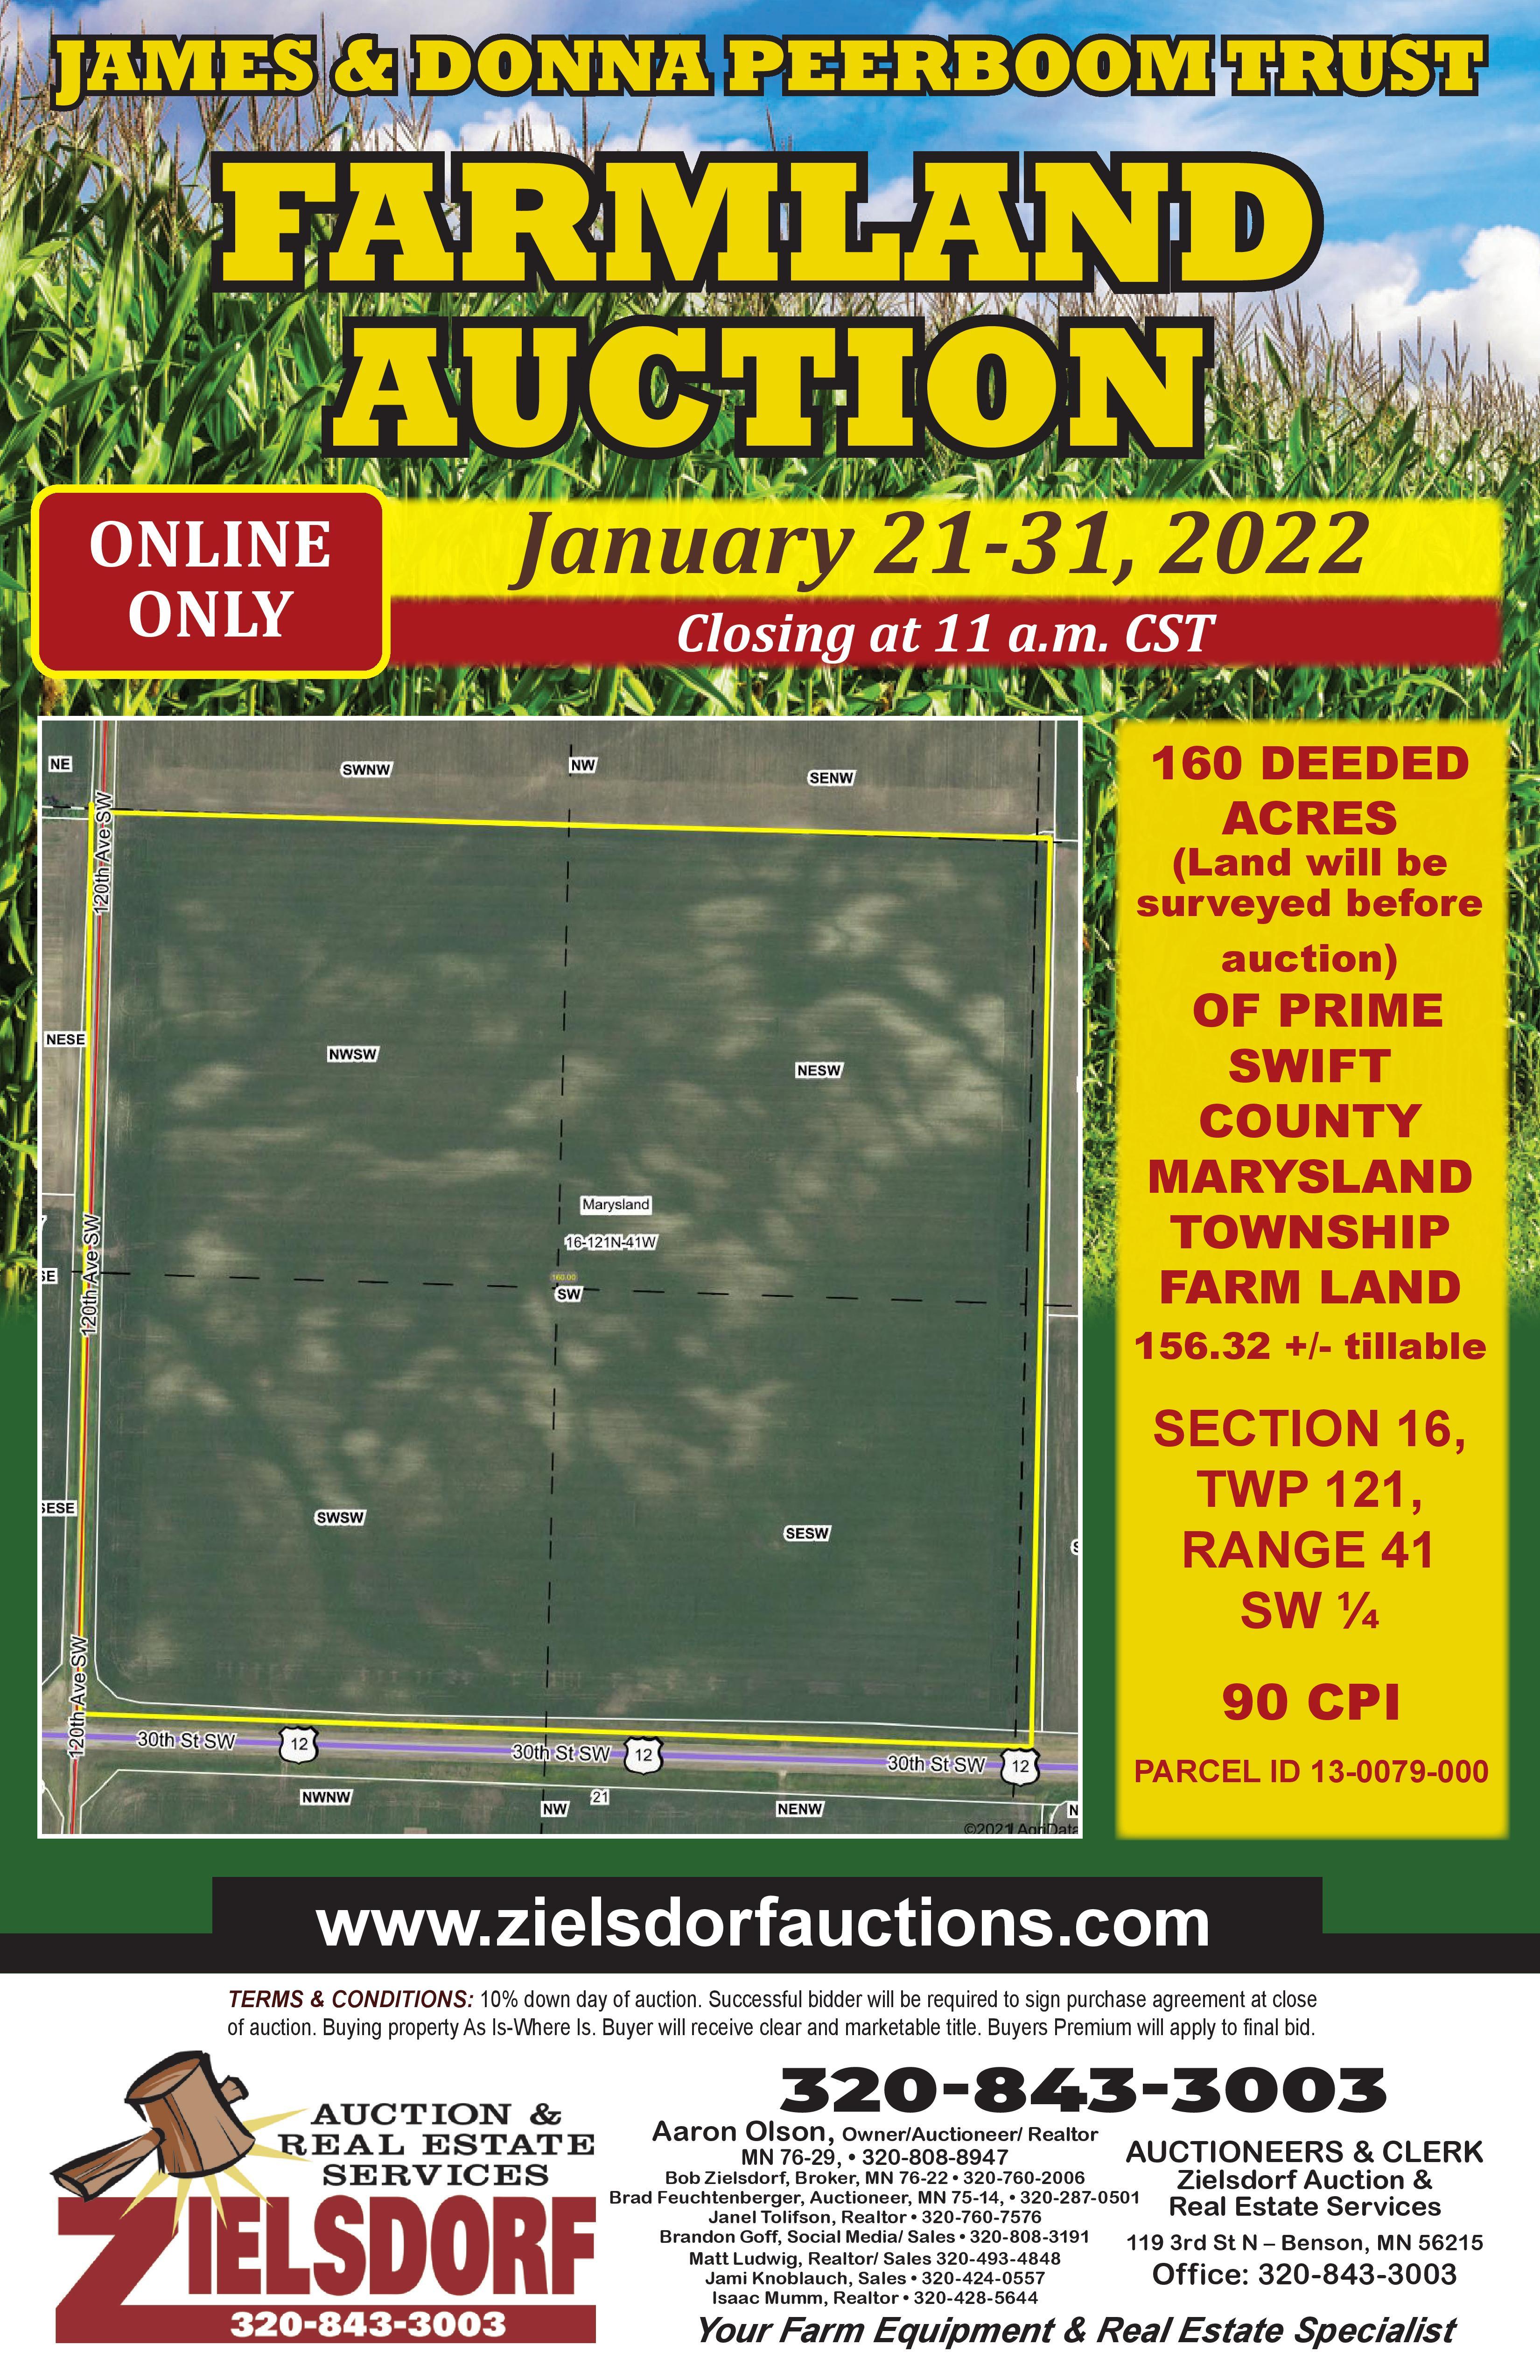 James & Donna Peerboom Trust Online Only Swift County Land Auction